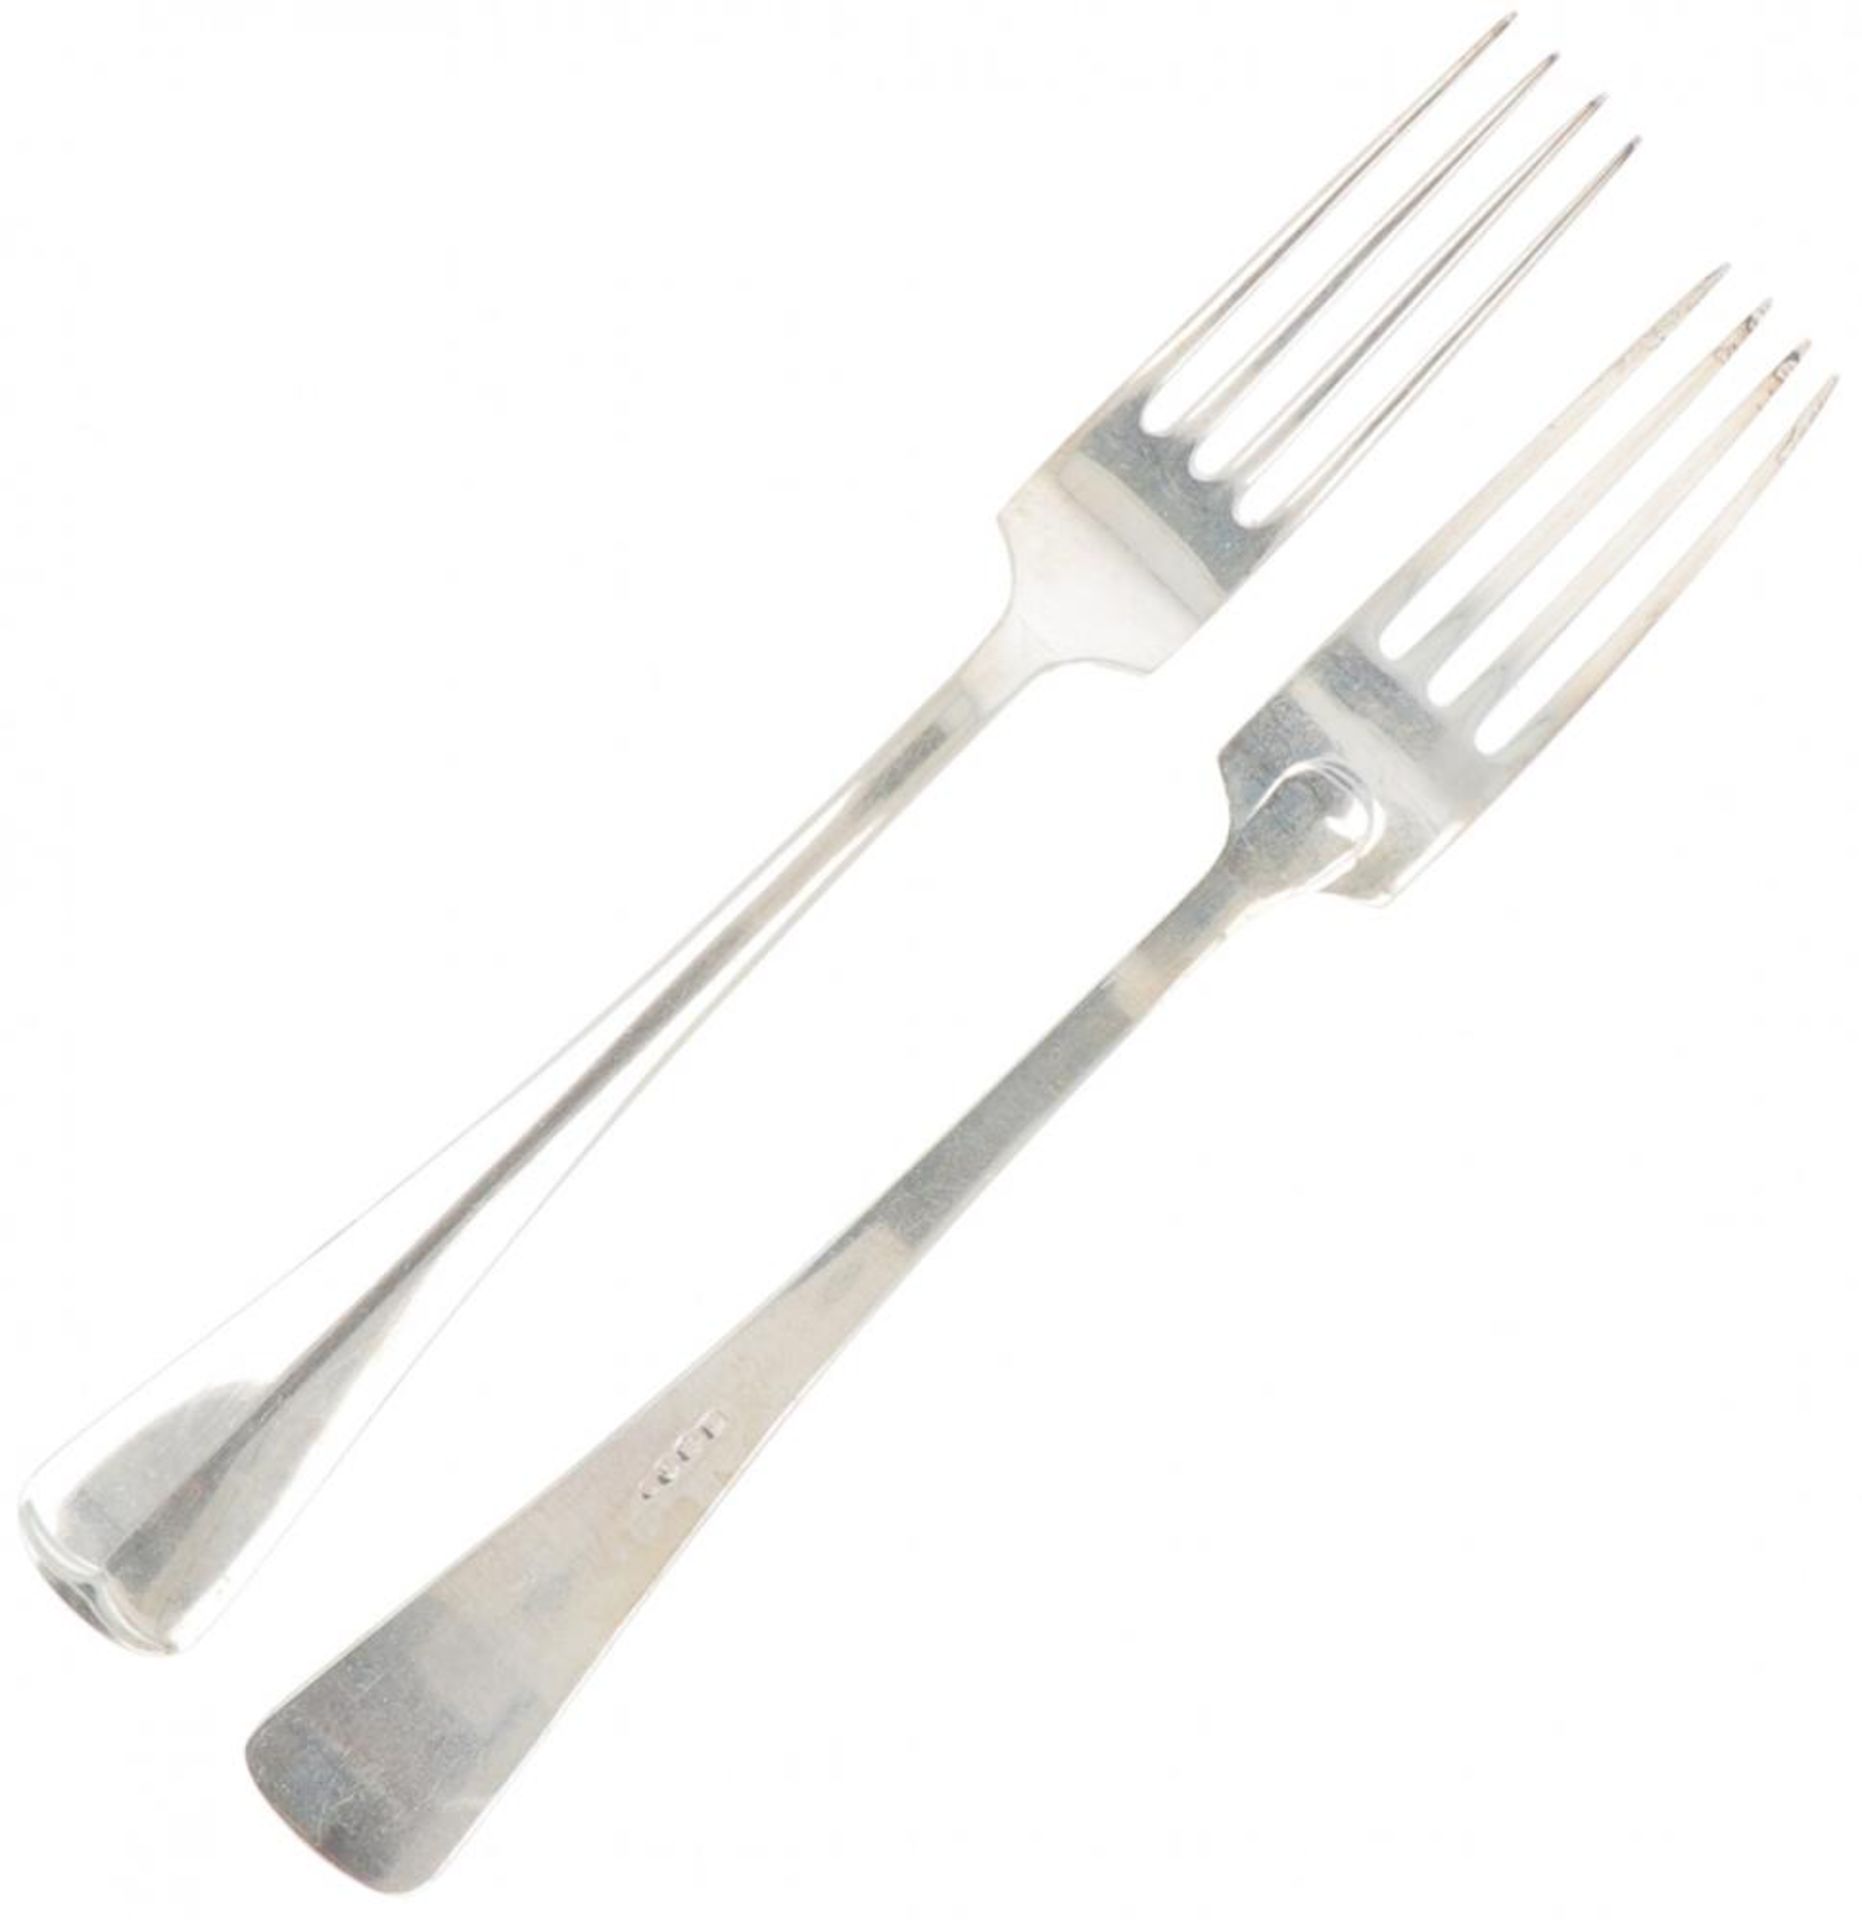 (8) piece set dinner forks "Haags Lofje" silver. - Image 2 of 3